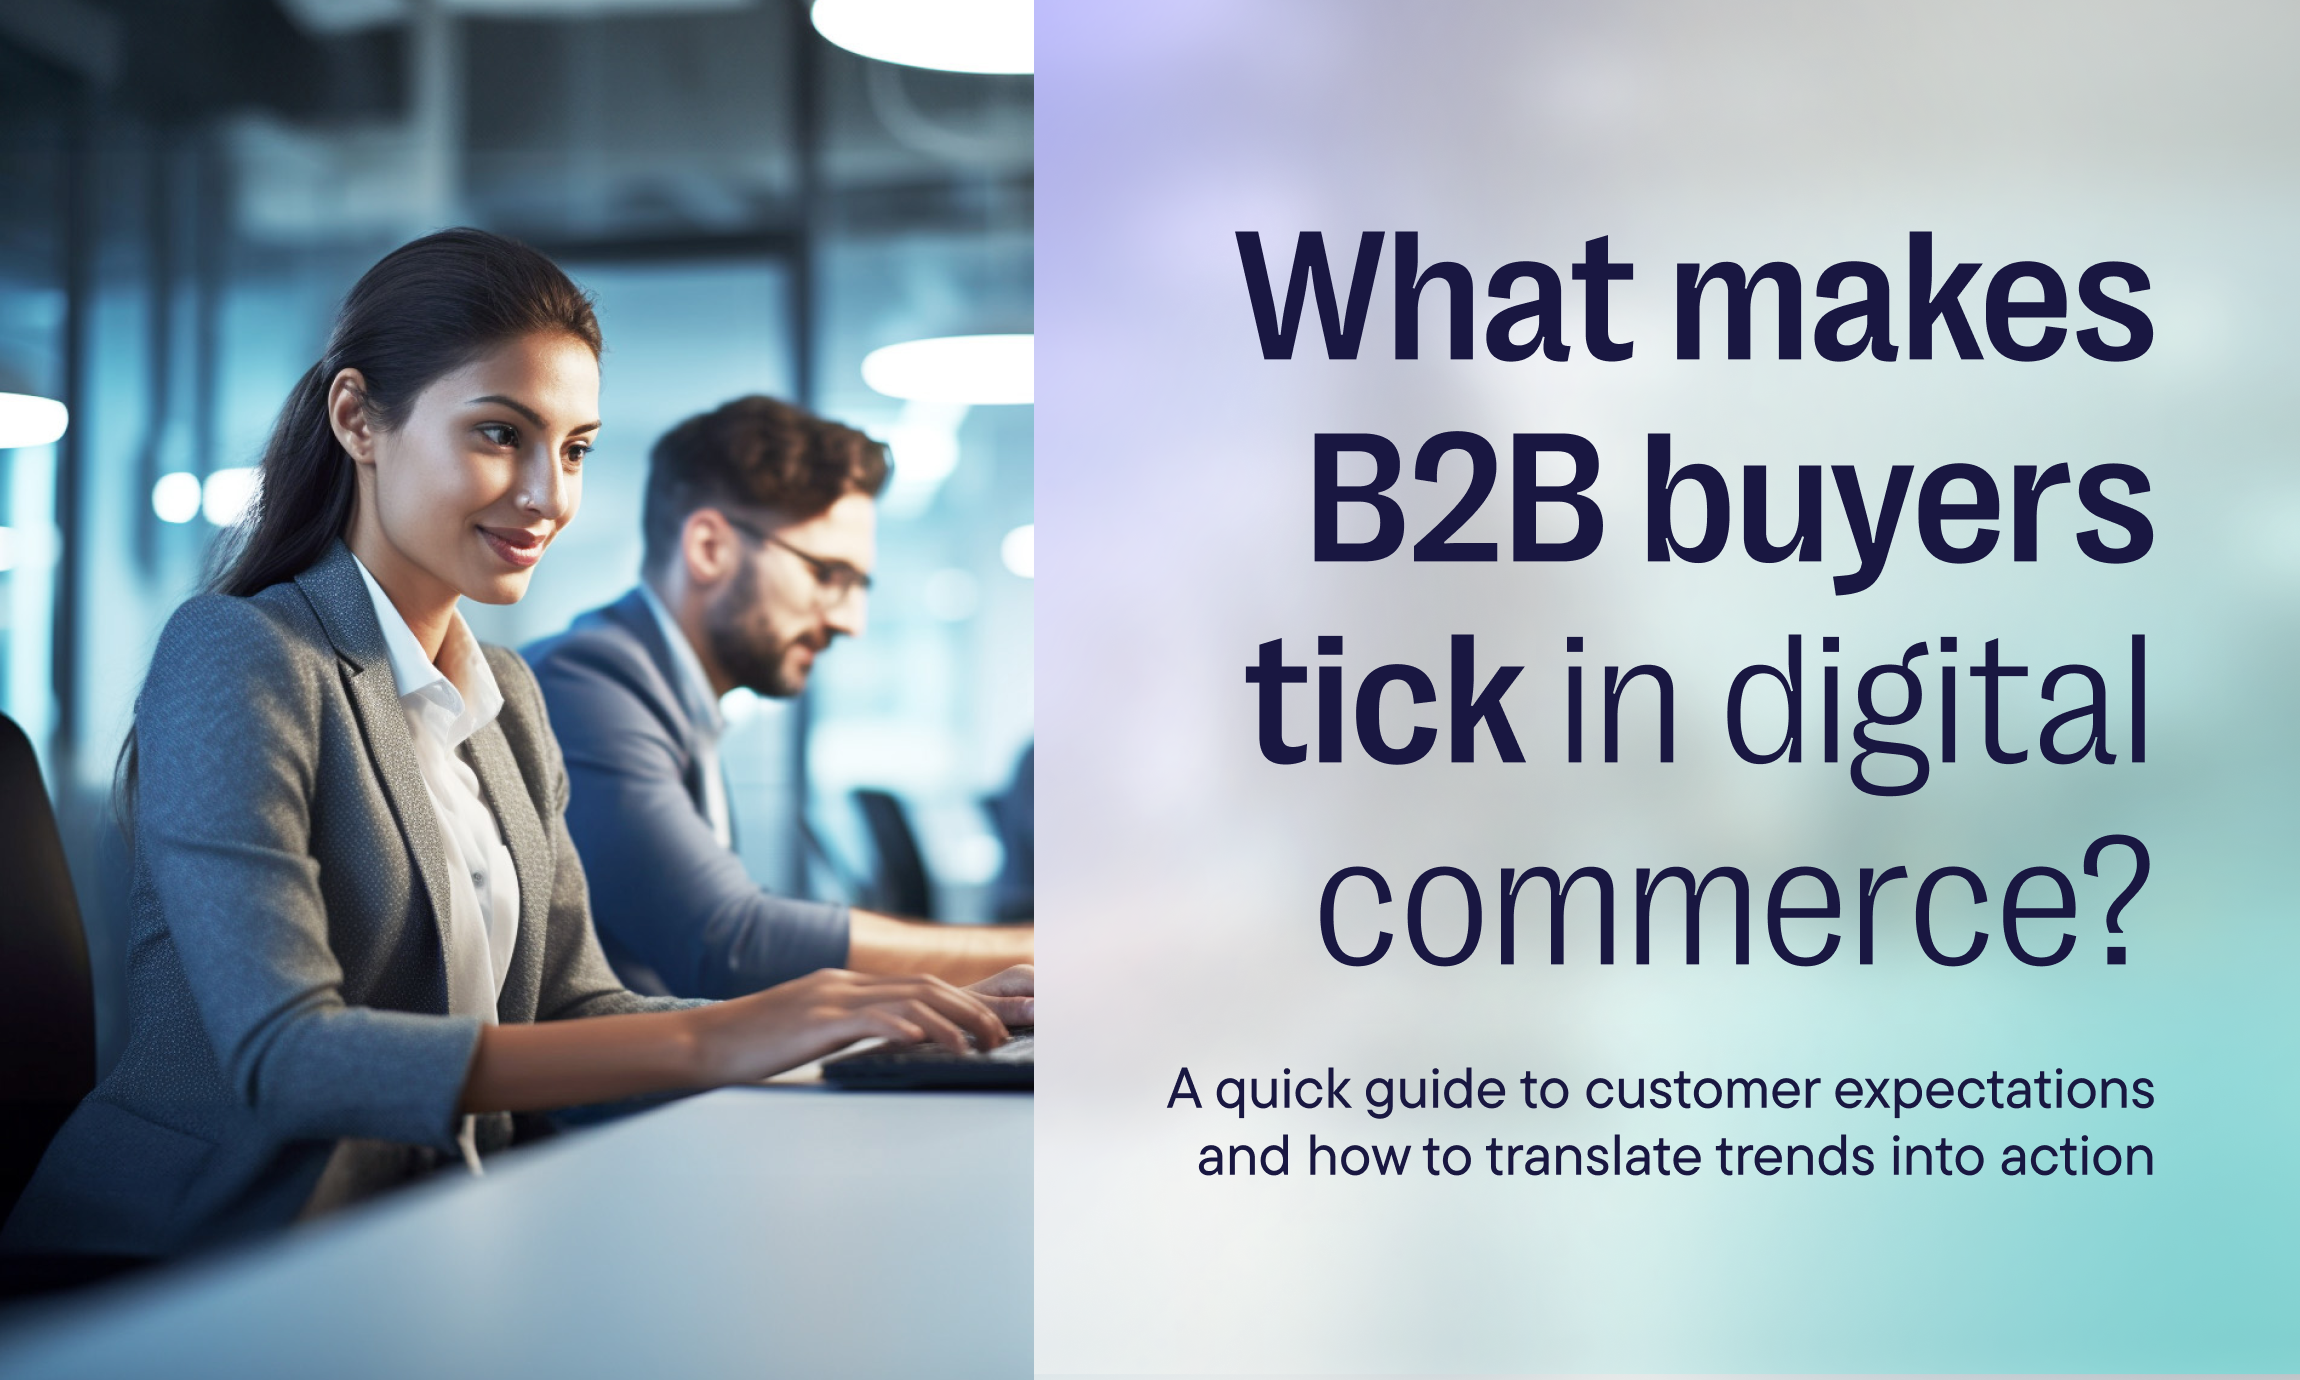 What makes B2B buyers tick in digital commerce?